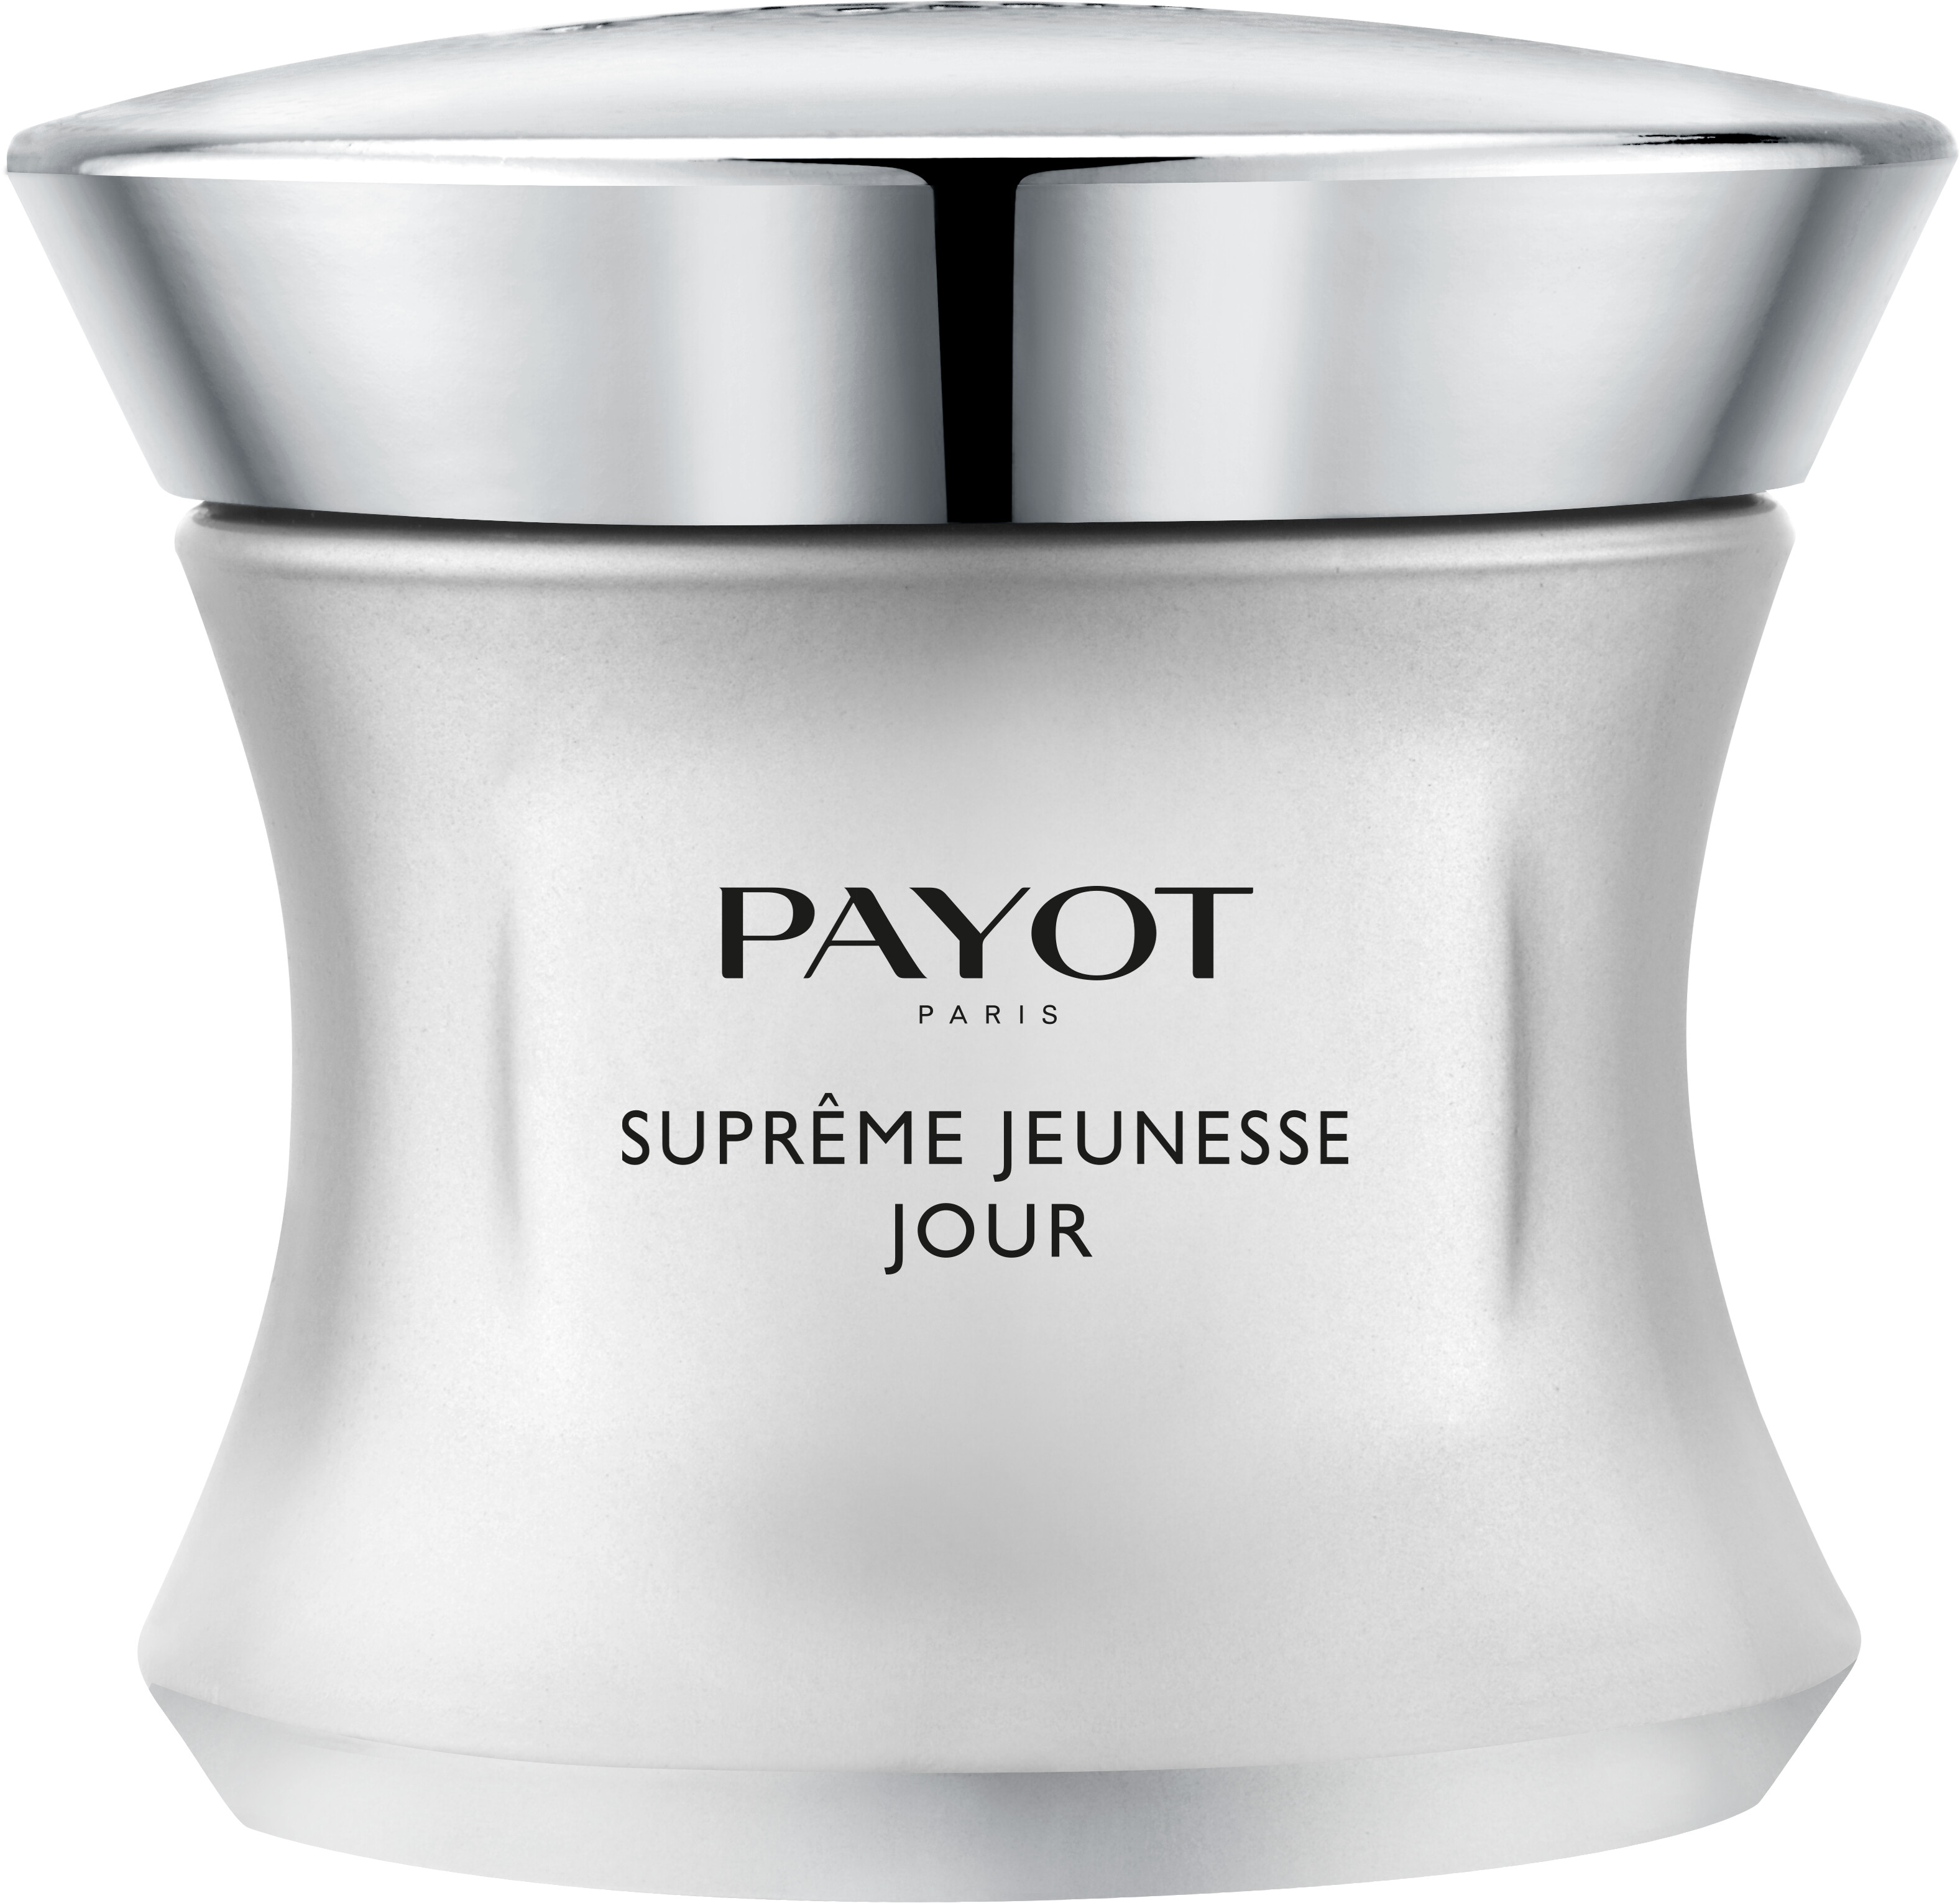 PAYOT Supreme Jeunesse Le Jour - Total Youth Enhancing Day Care 50ml